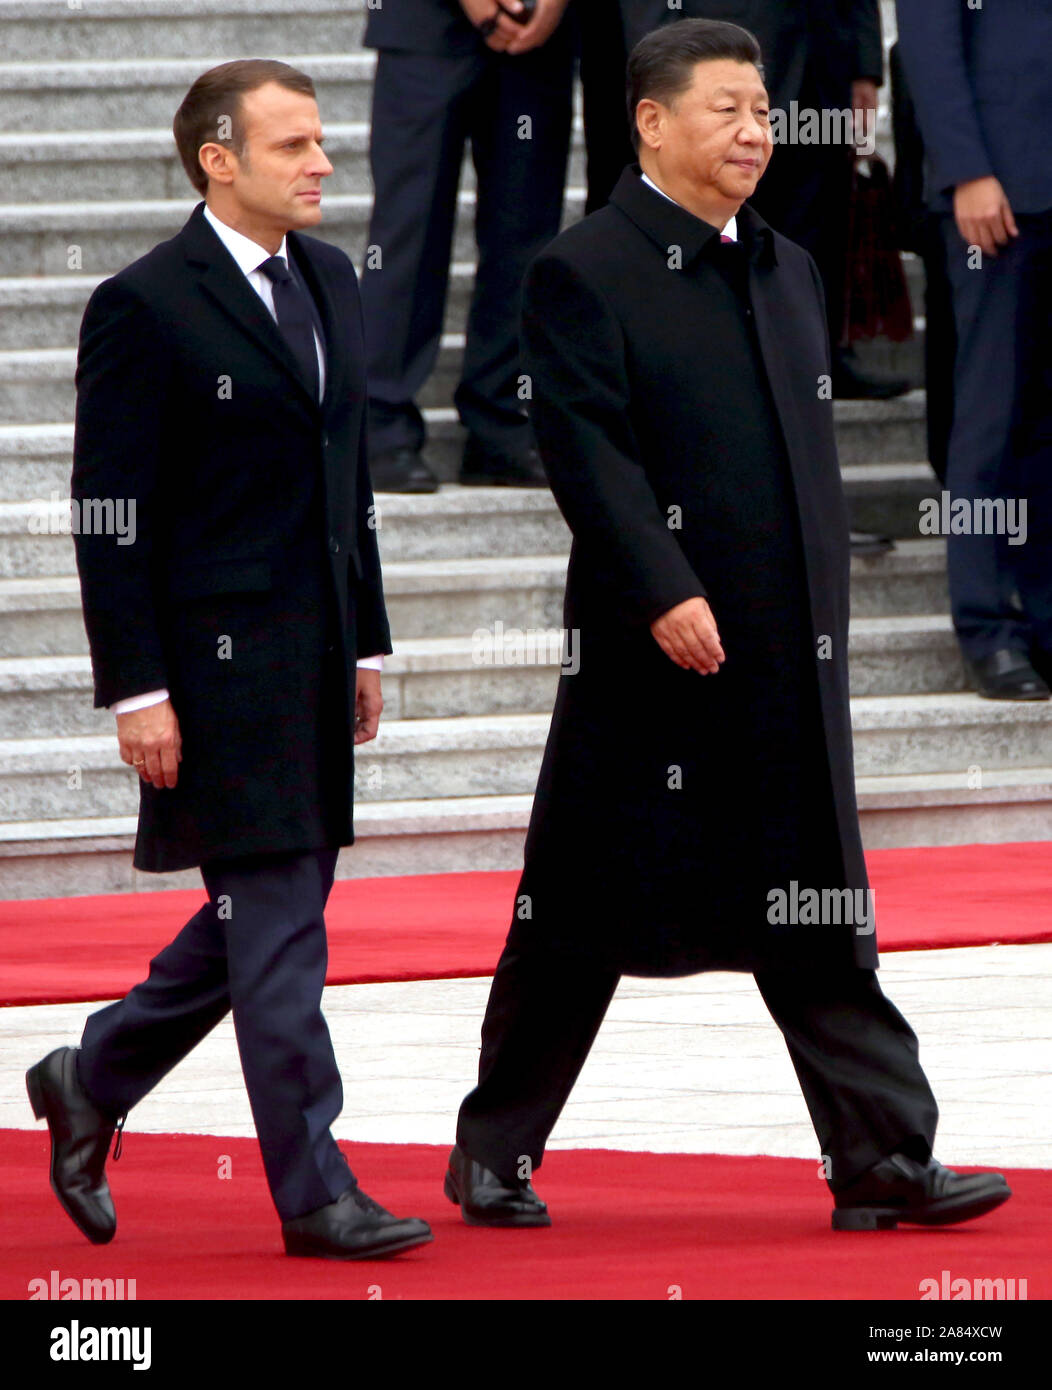 Beijing, China. 06th Nov, 2019. French President Emmanuel Macron (L)) and Chinese President Xi Jinping attend a welcoming ceremony at the Great Hall of the People in Beijing on Wednesday, November 6, 2019. After the ceremony, Xi said the two leaders had 'sent a strong signal to the world about steadfastly upholding multilateralism and free trade, as well as working together to build open economies.' Photo by Stephen Shaver/UPI Credit: UPI/Alamy Live News Stock Photo